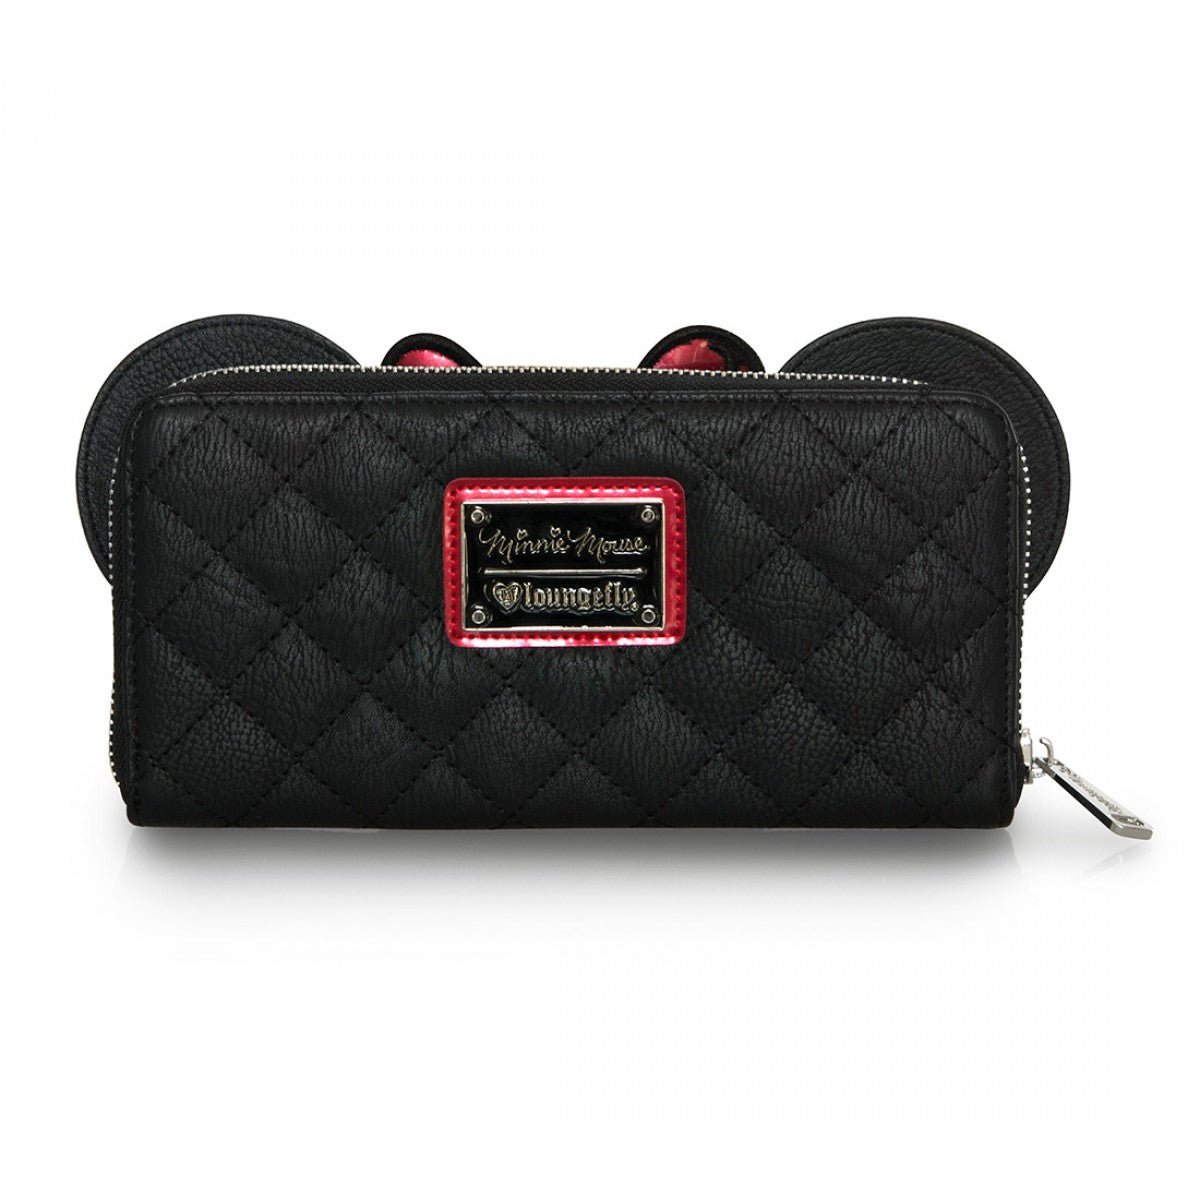 Loungefly x Minnie Mouse Quilted Bow Purse - GeekCore